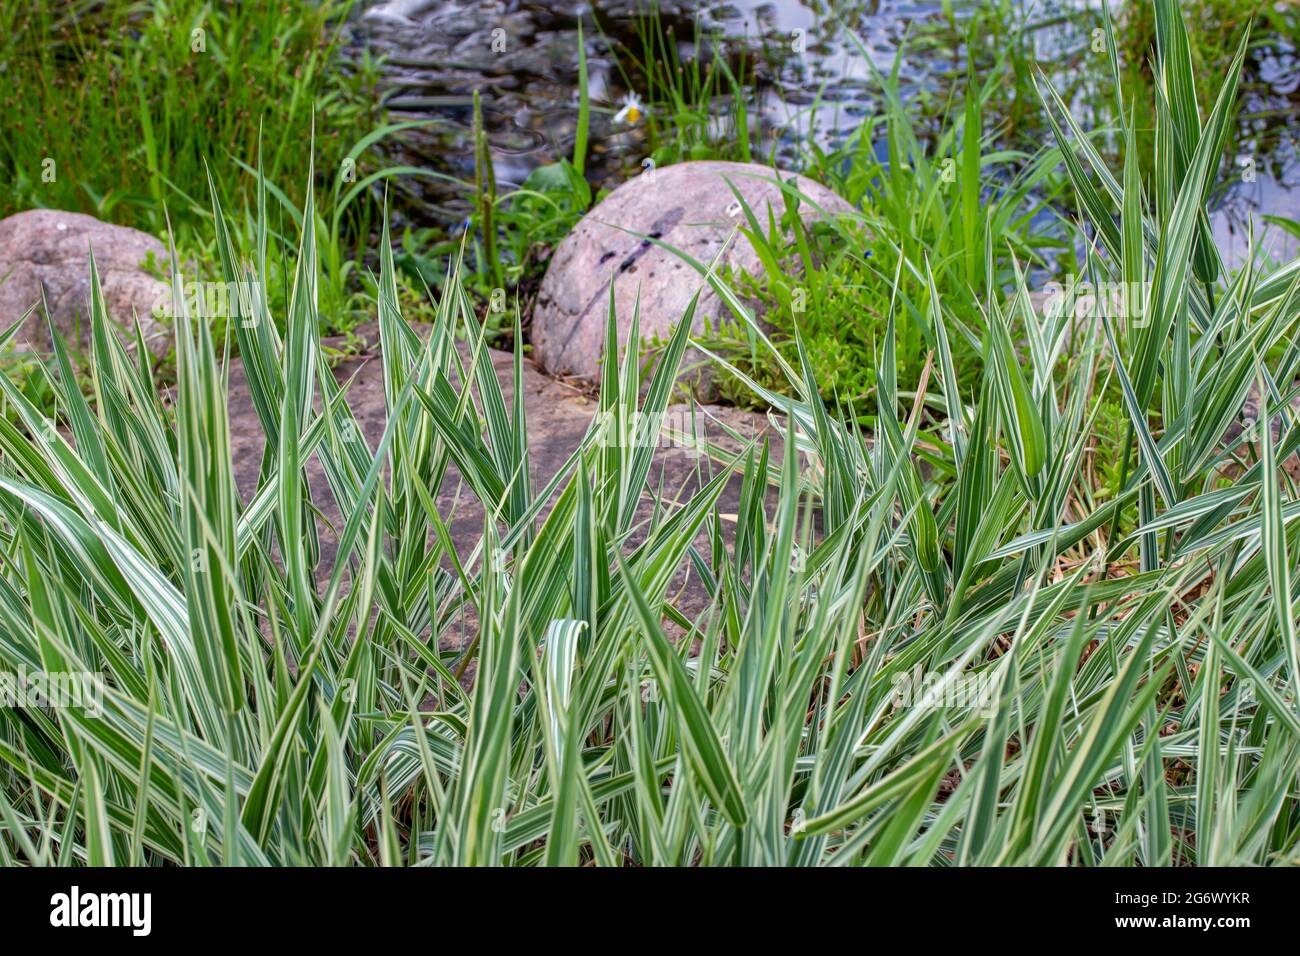 This image shows a landscape image of green variegated Japanese sedge grass (carex morrowii) in front of a rustic garden pond on a sunny day. Stock Photo